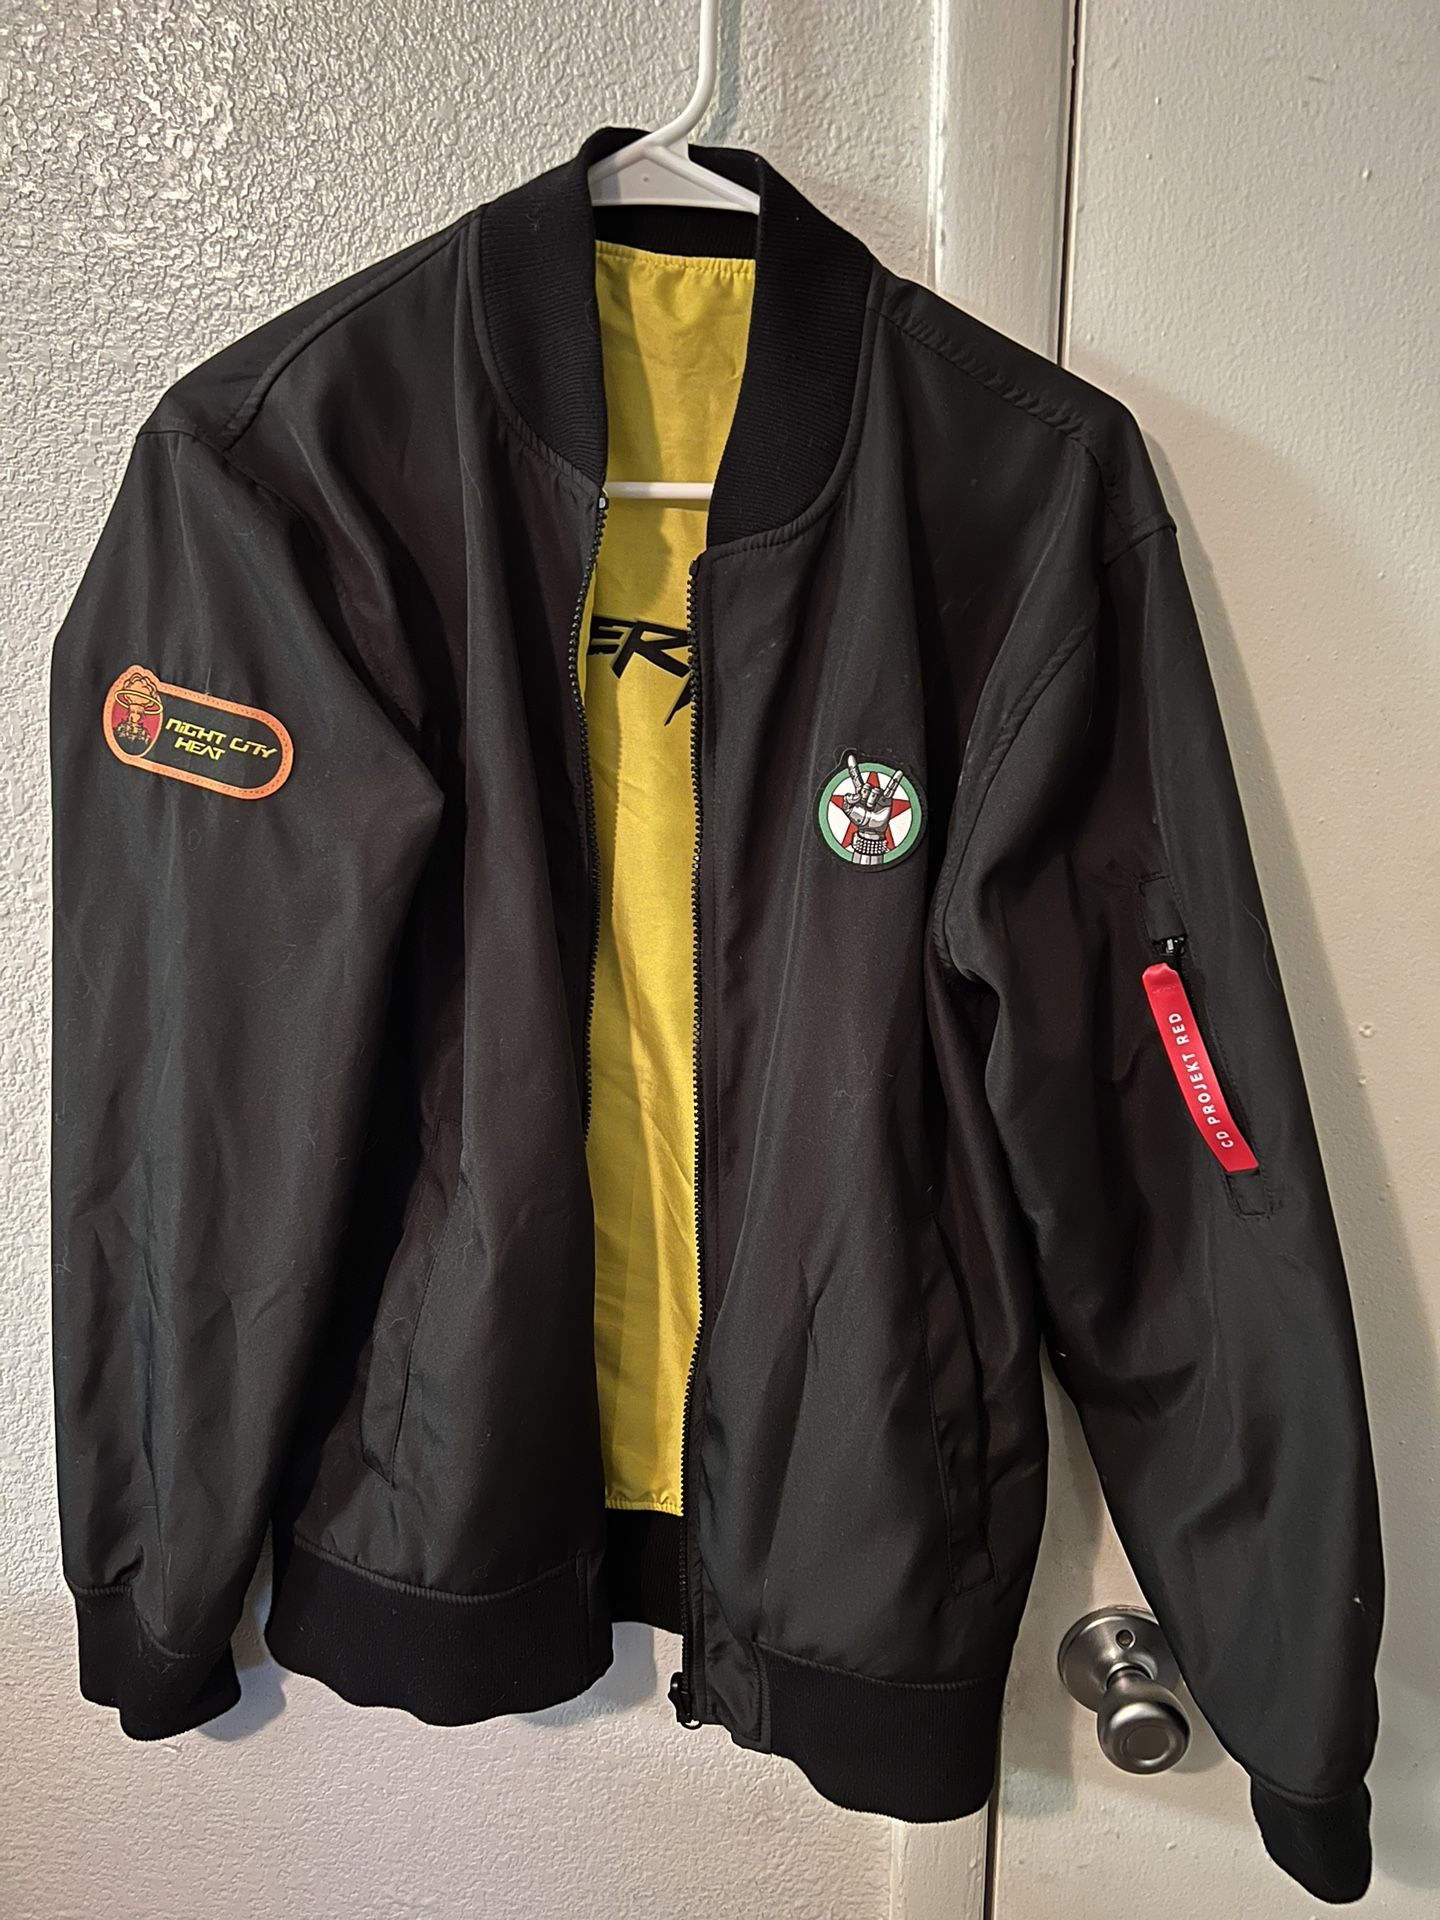 Cyberpunk 2077 - (E3 2019) Exclusive Double Sided Bomber Jacket (Size M/L)